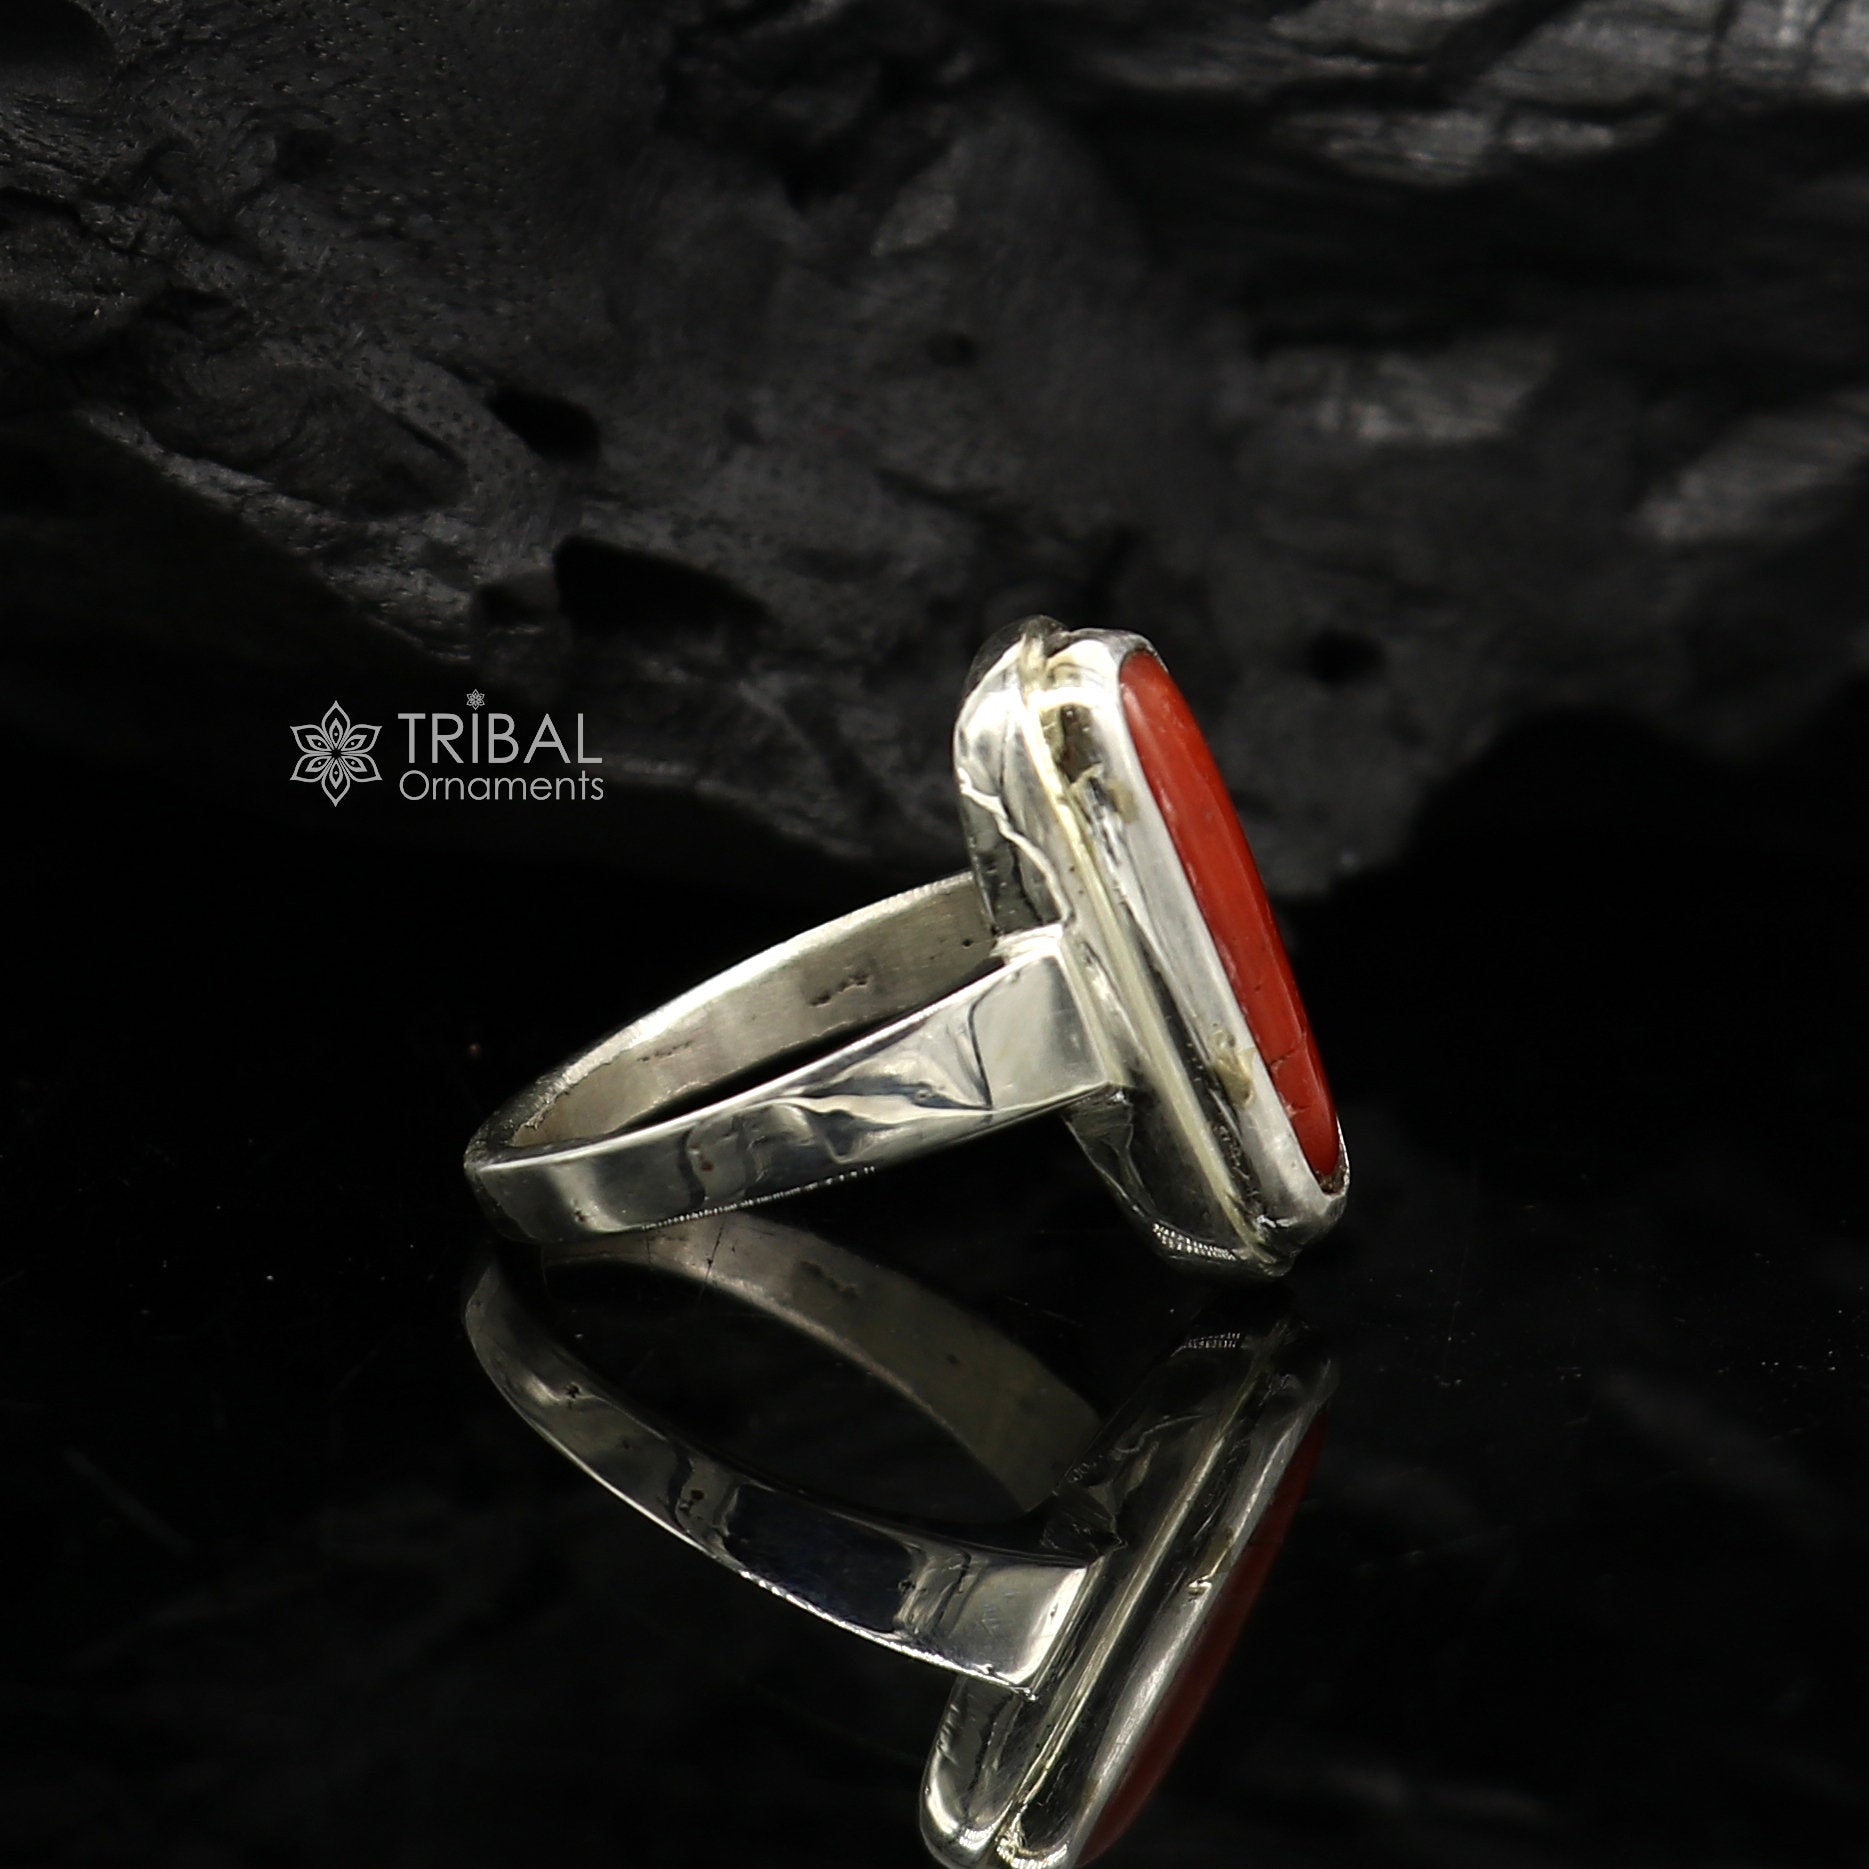 Red Coral Sterling Silver Ring (Design AC9) | GemPundit